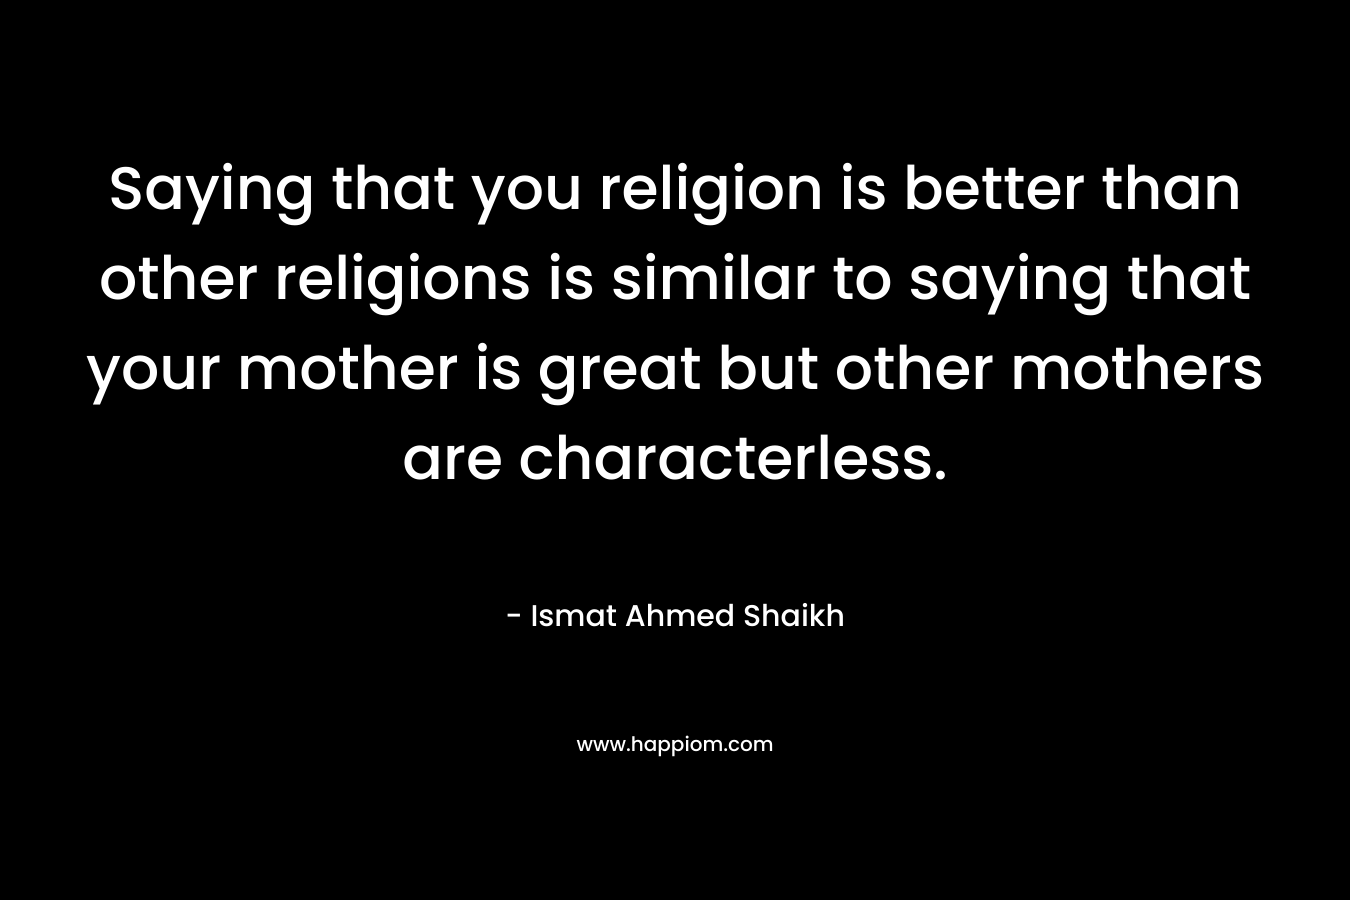 Saying that you religion is better than other religions is similar to saying that your mother is great but other mothers are characterless. – Ismat Ahmed Shaikh